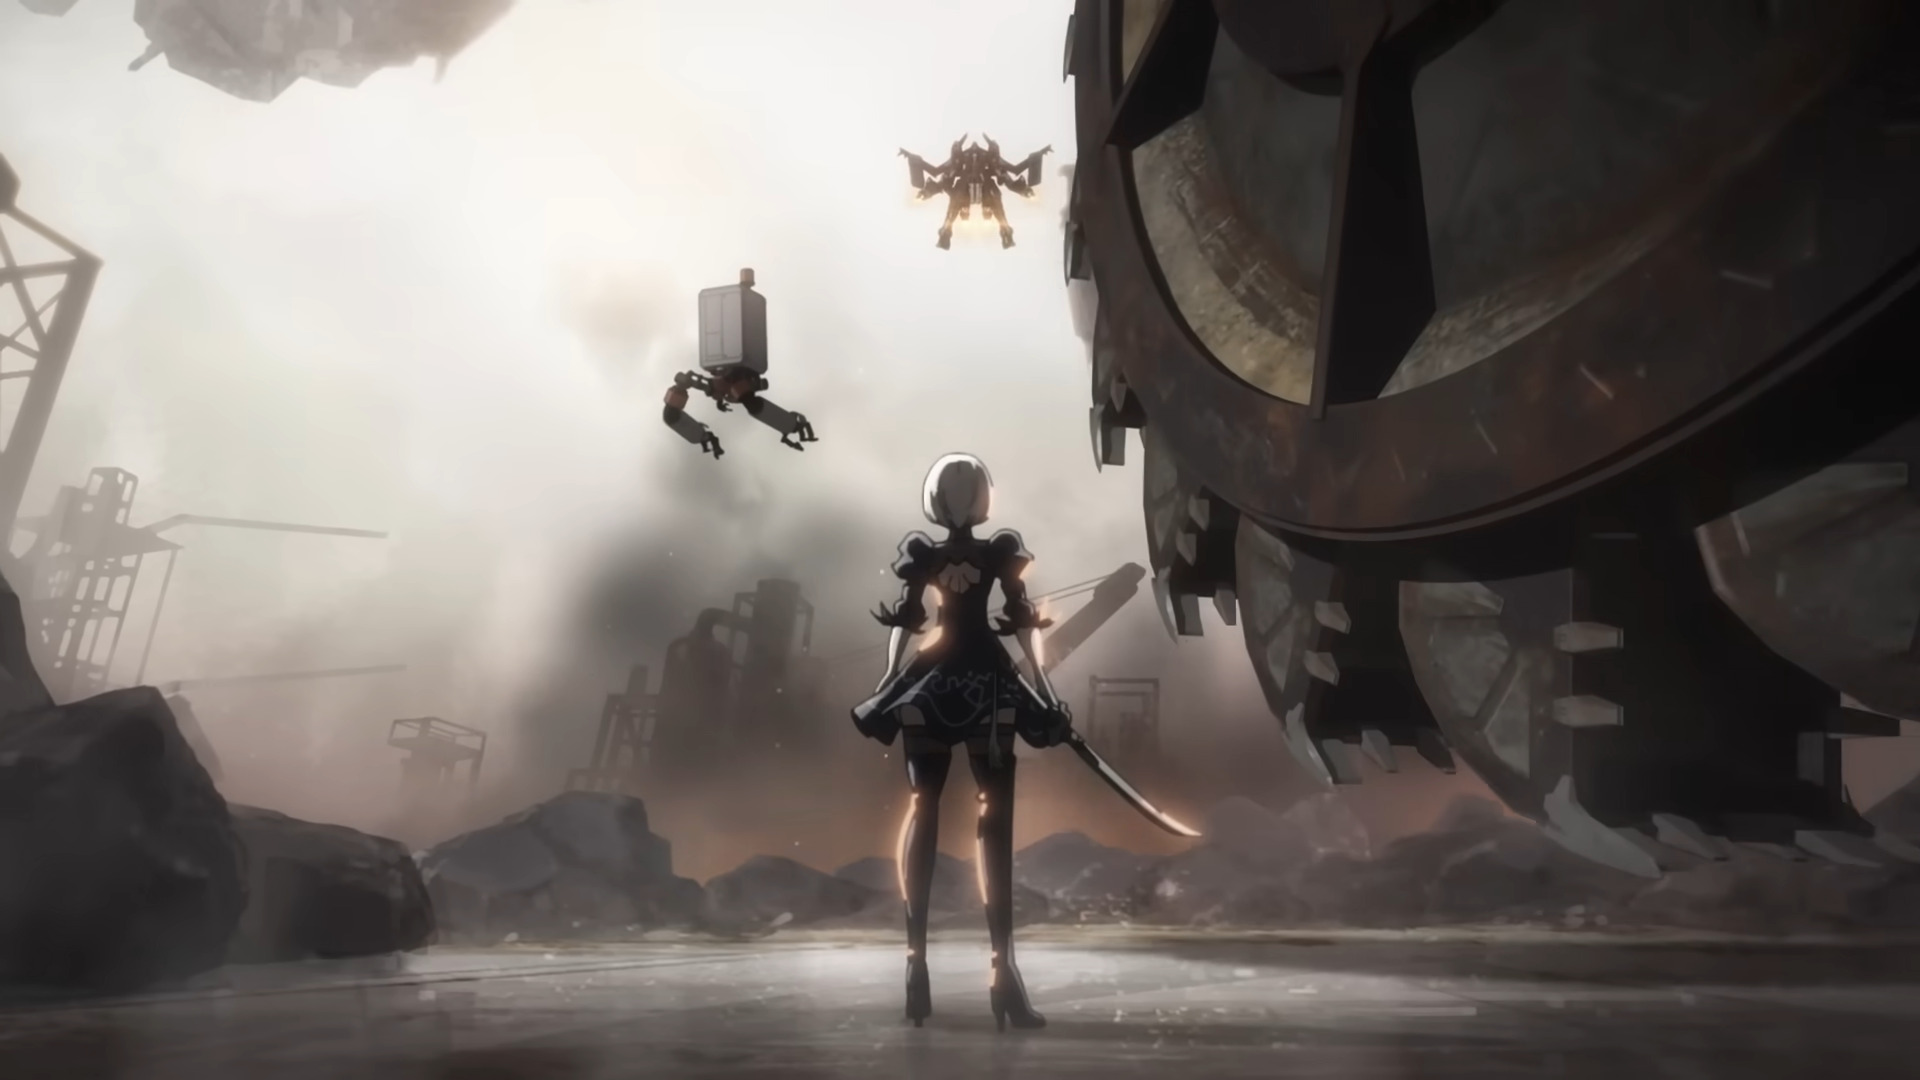 Nier Automata Ver 1.1a anime series will premiere in January 2023